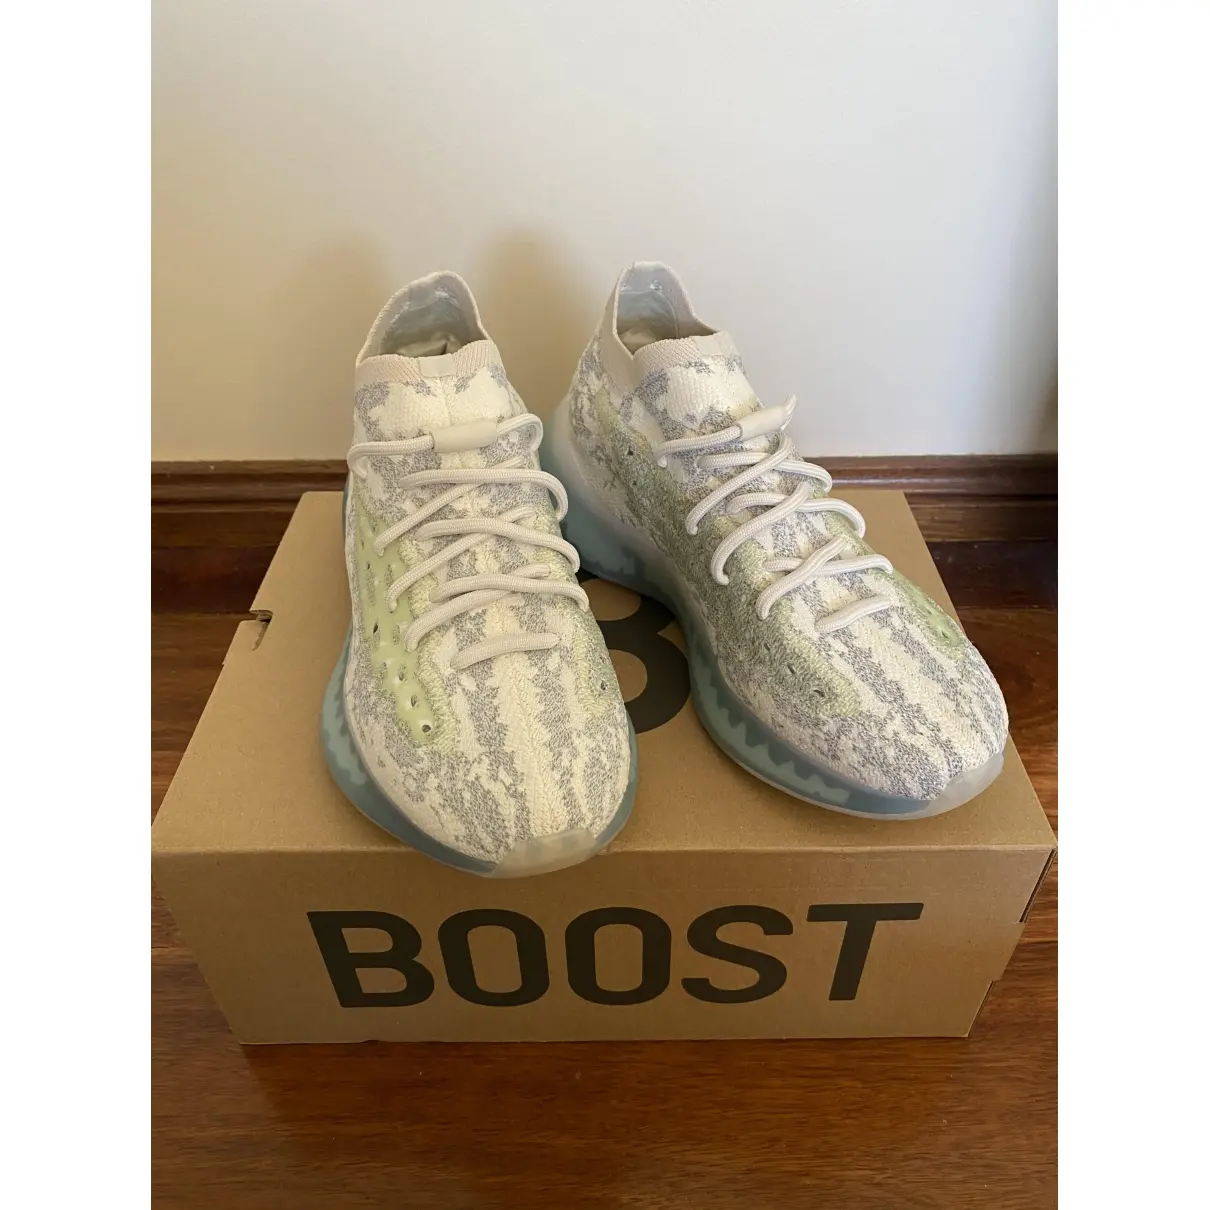 Buy Yeezy x Adidas Boost 380 low trainers online